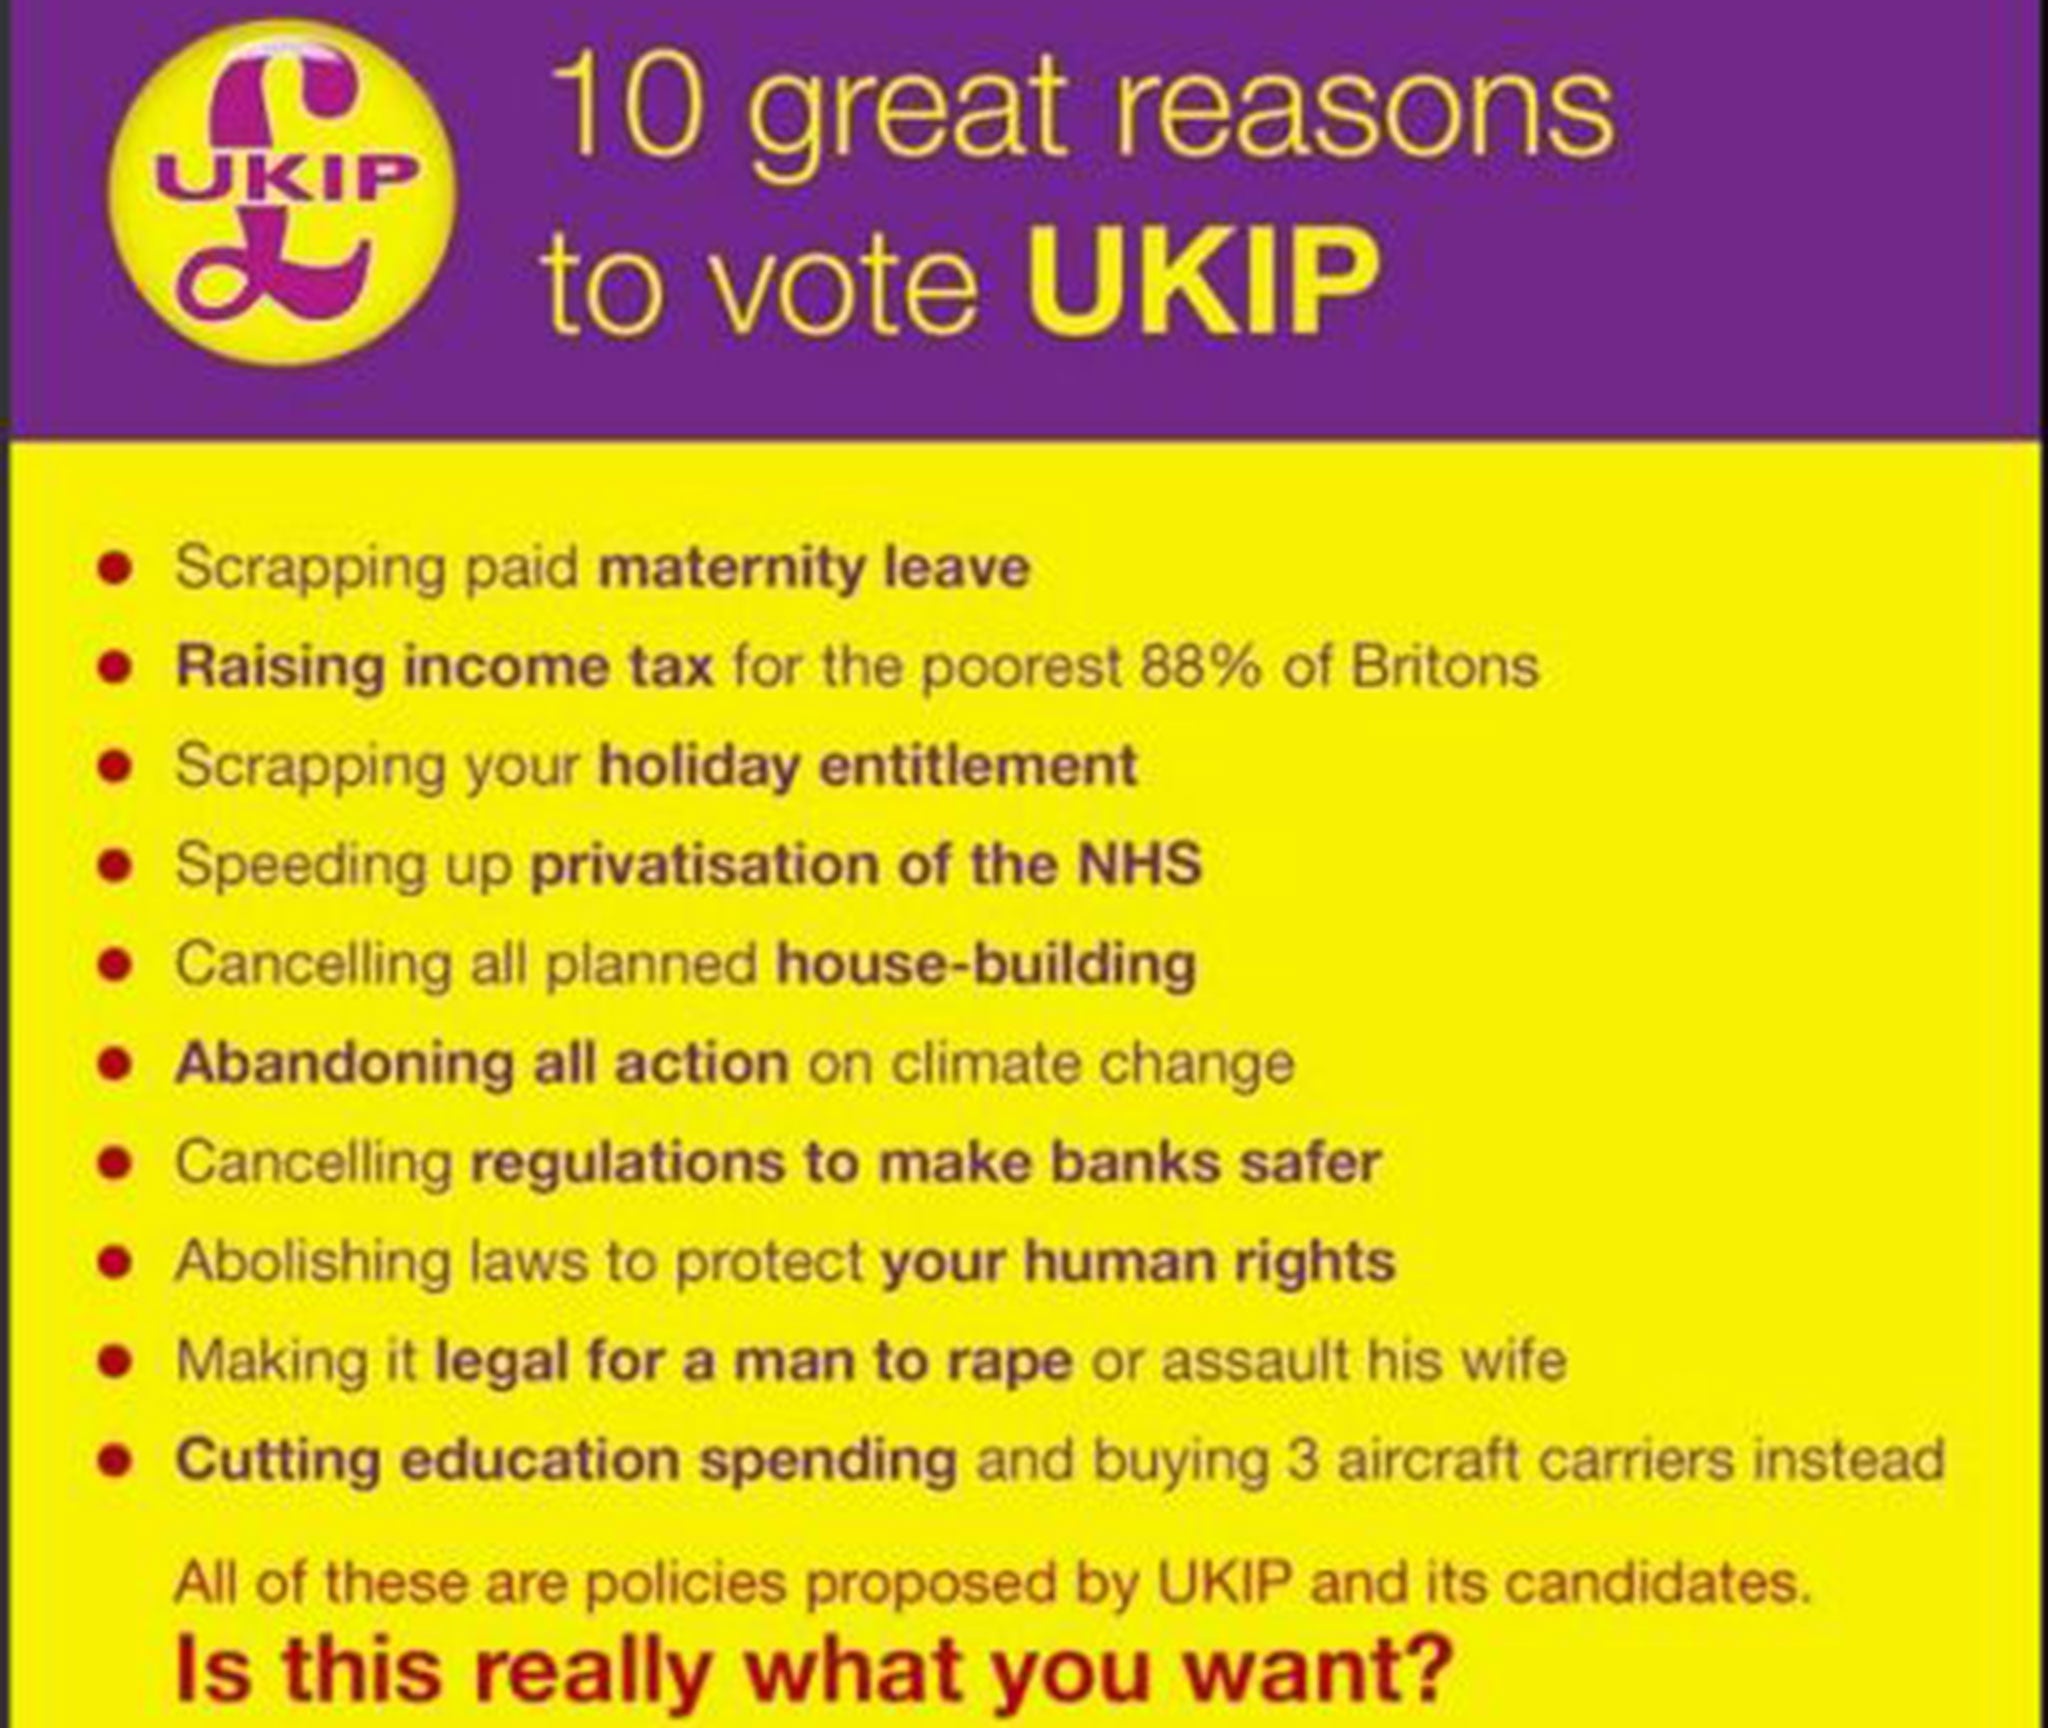 Michael Abberton posted a ‘mocked-up’ Ukip poster on his Twitter account